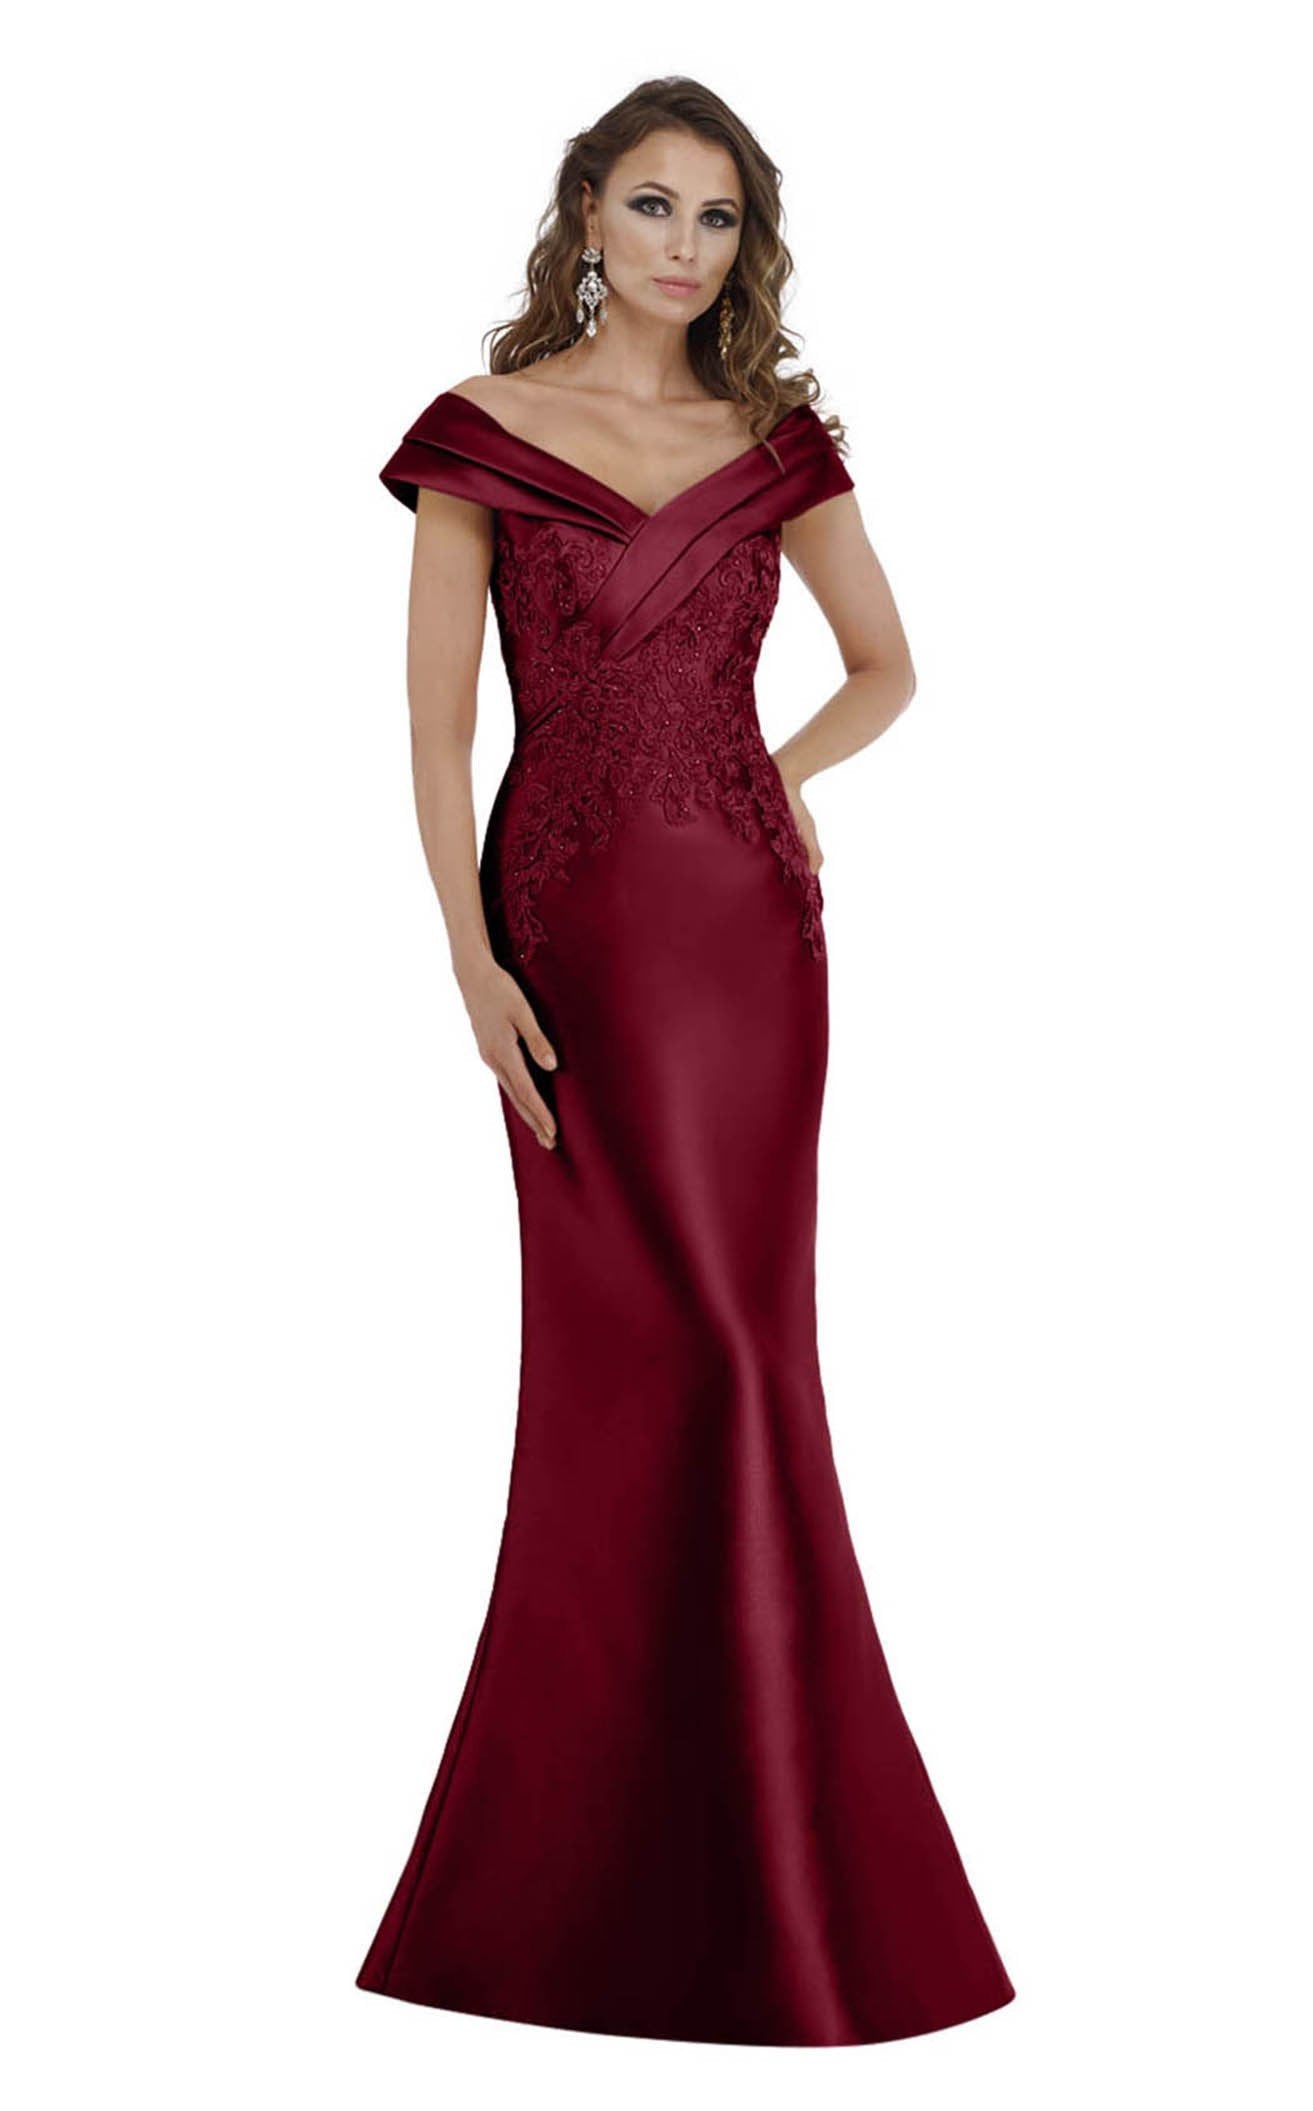 Gia Franco - Tiered Off-Shoulder Lace Appliqued Evening Gown 12005 In Red